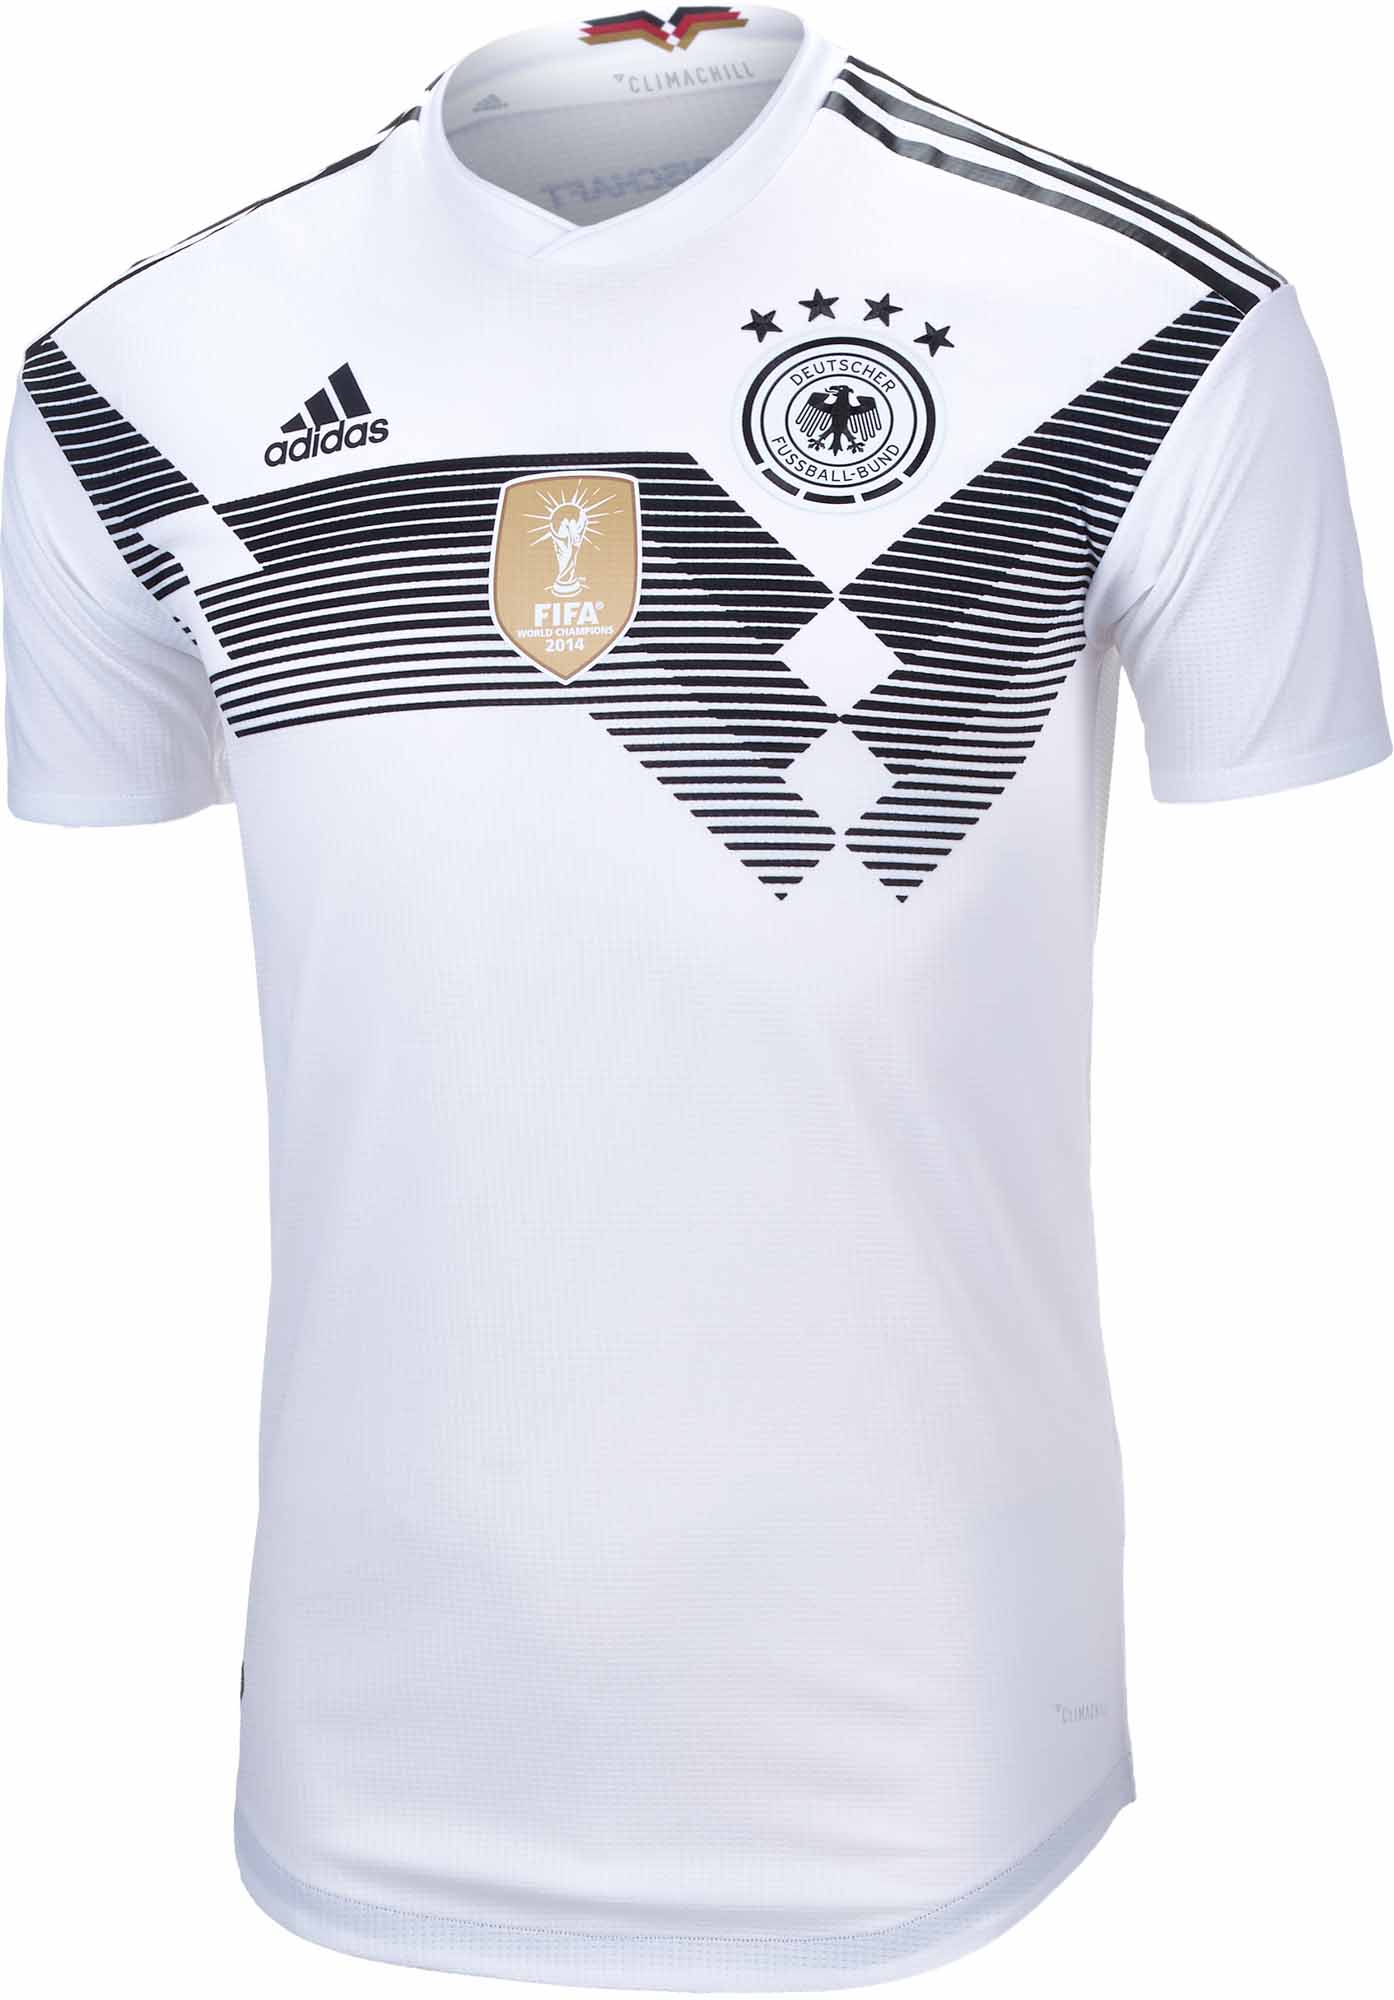 Adidas Germany Cup 2018 Men's Home Lazada Singapore